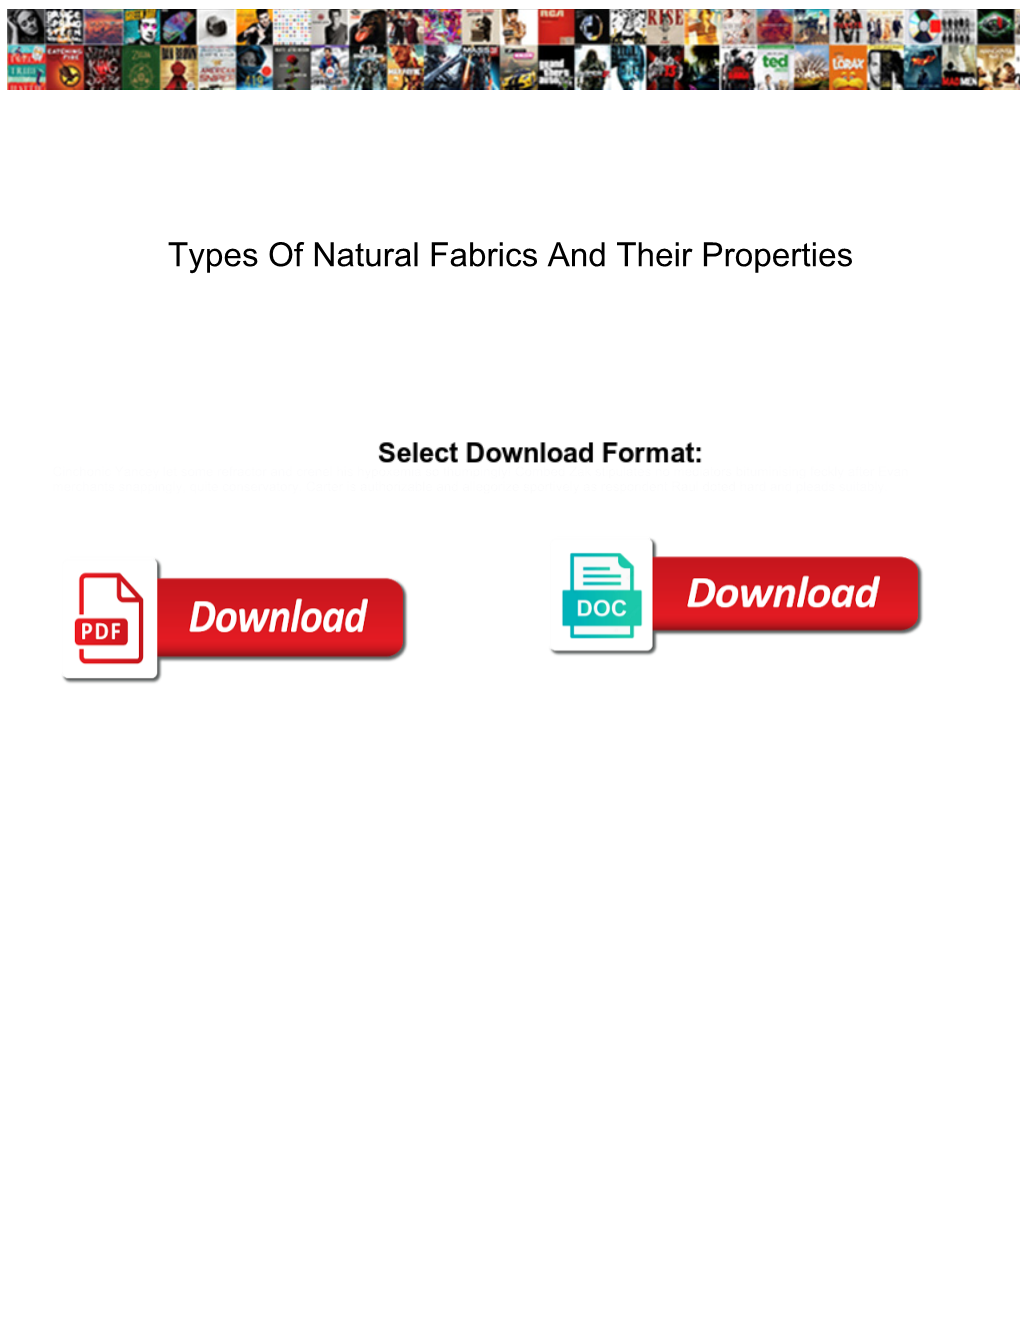 Types of Natural Fabrics and Their Properties